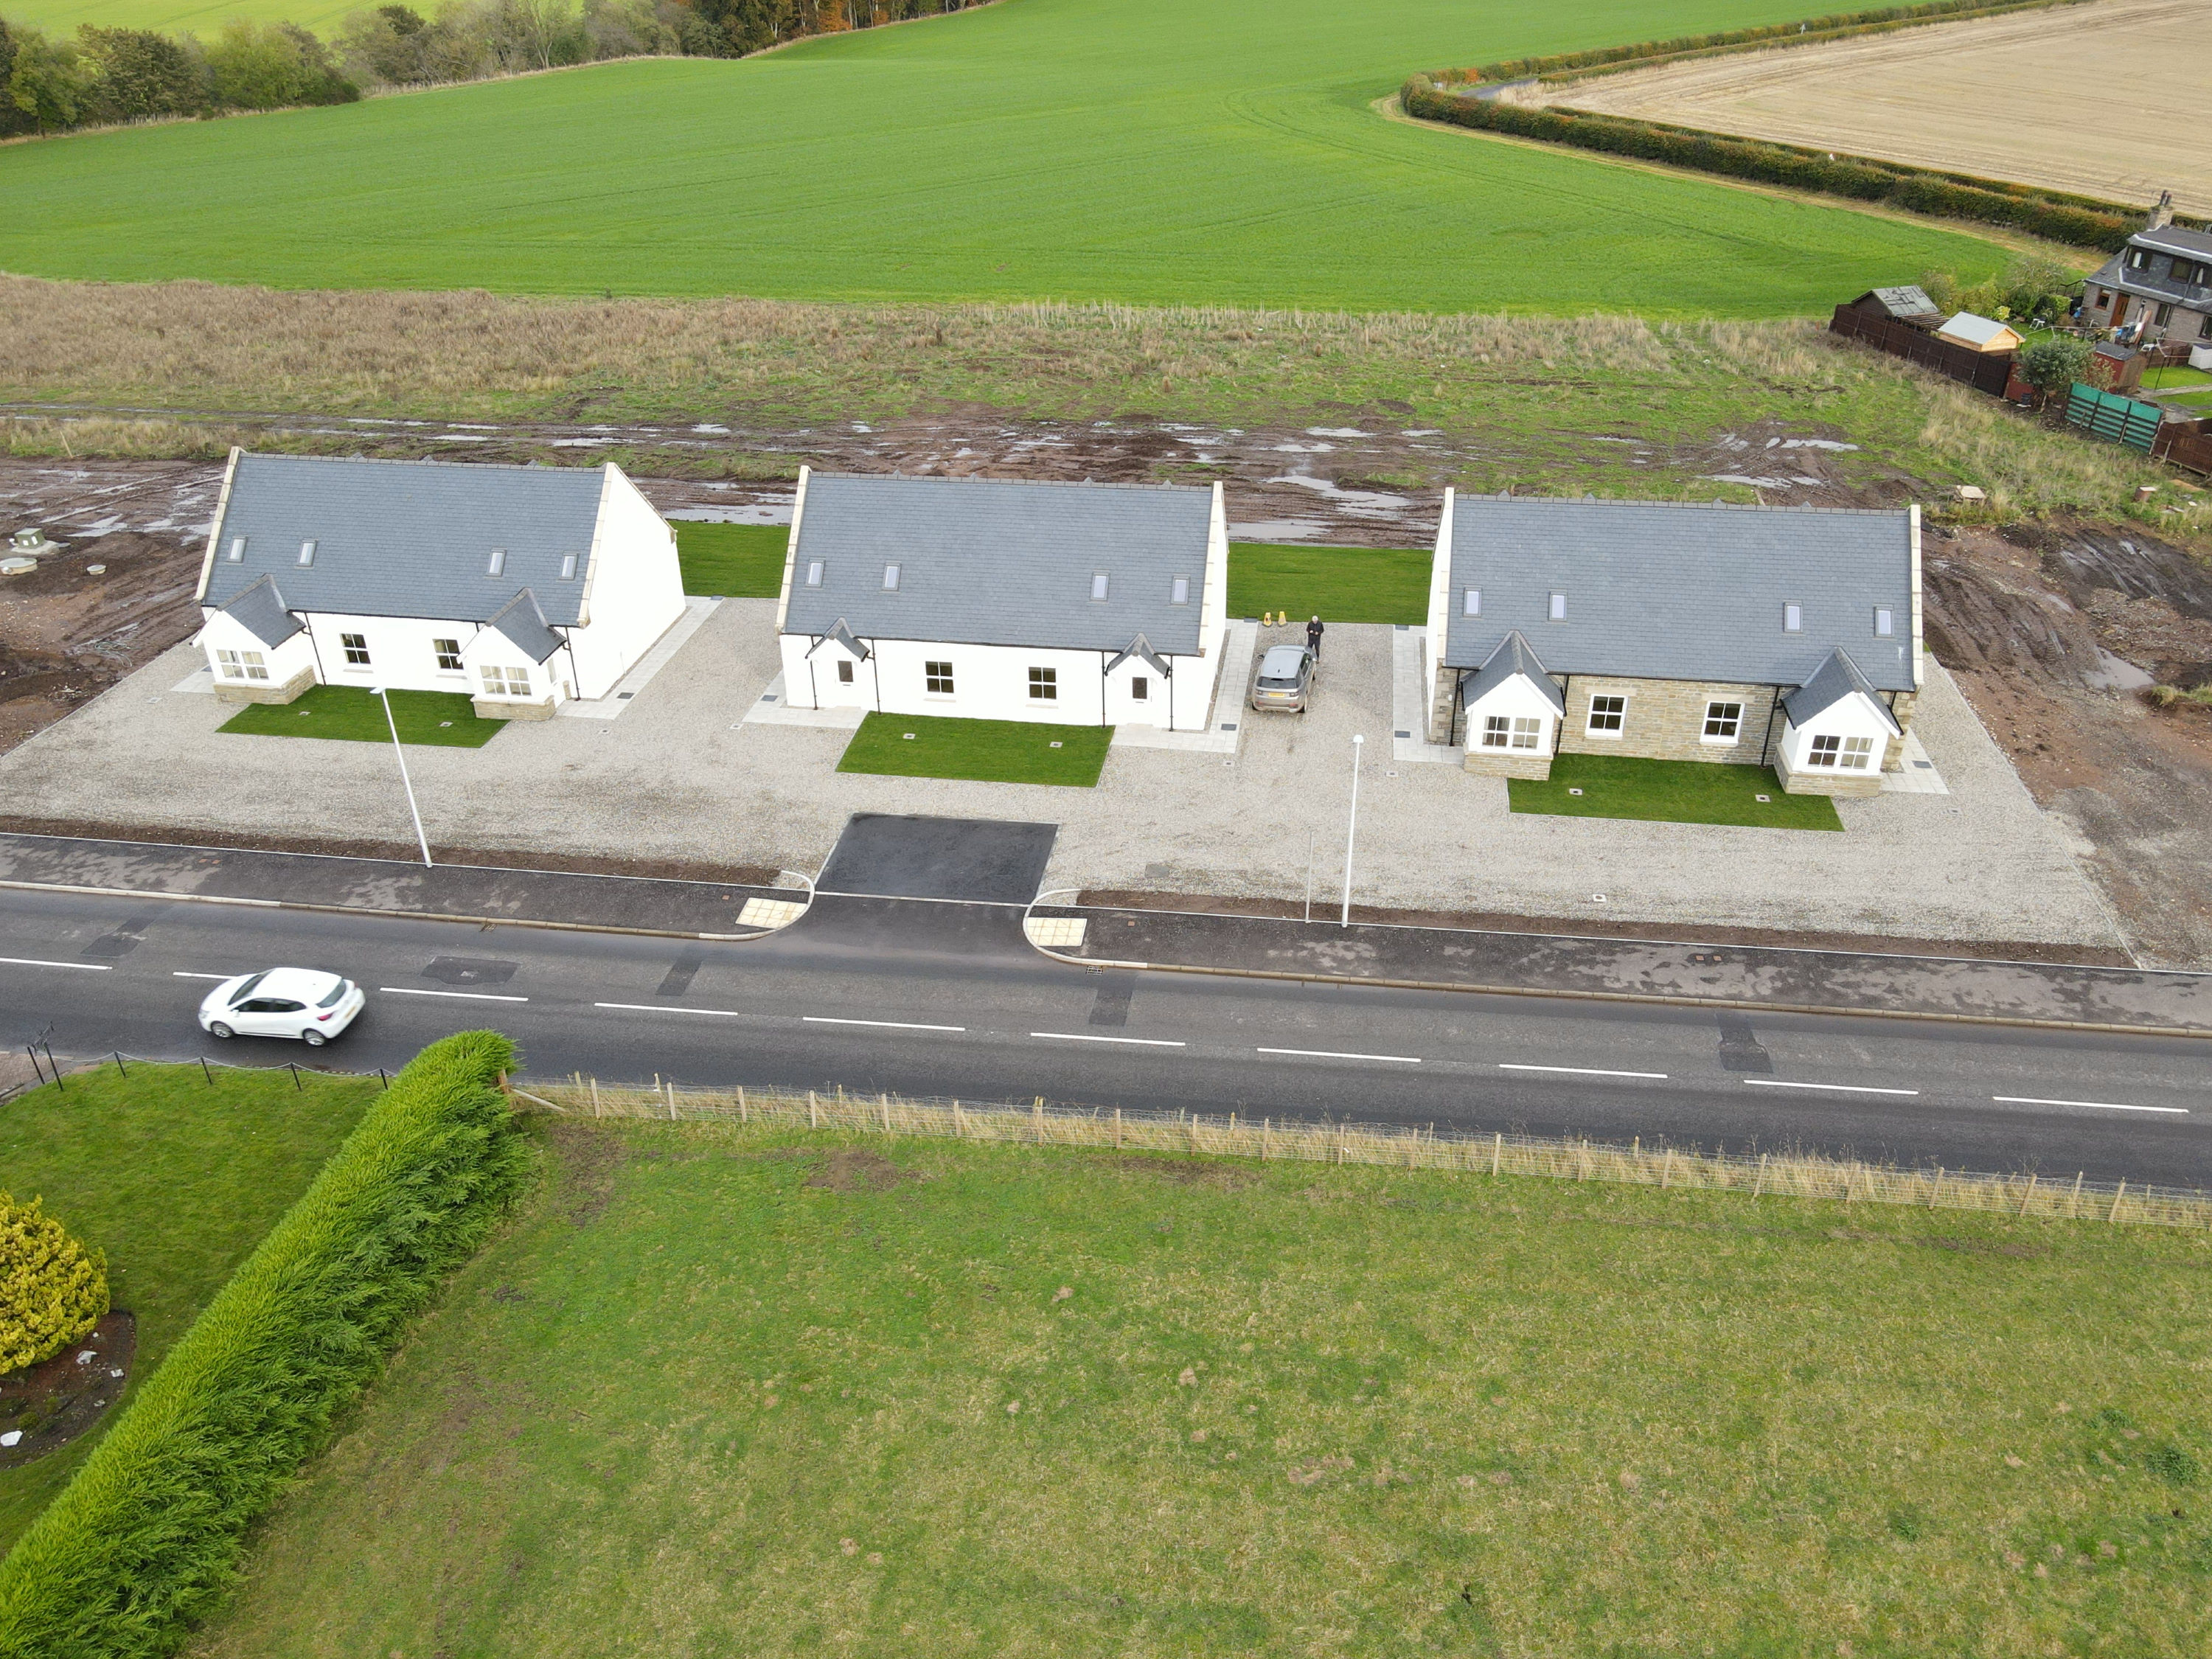 New affordable housing development unveiled at Stracathro estate